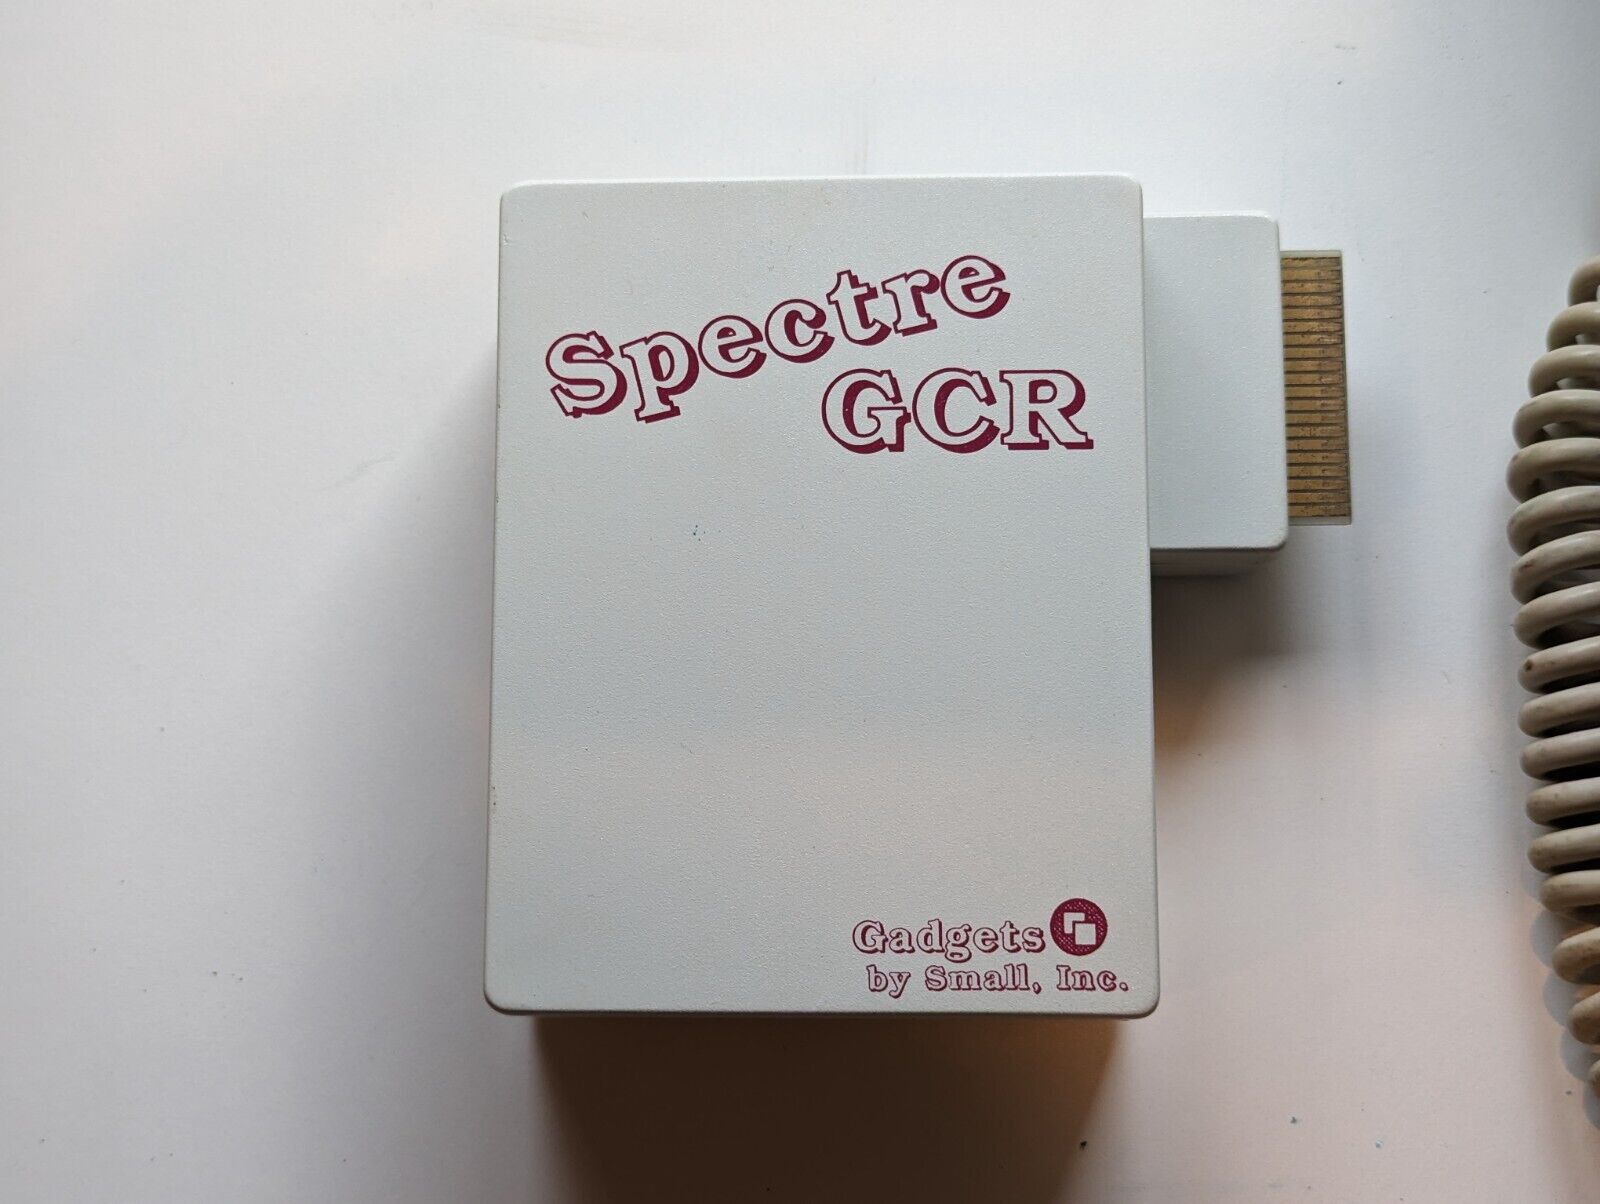 RARE ATARI ST SPECTRE GCR APPLE Macintosh Emulator Only No Disks Or Cable AS IS